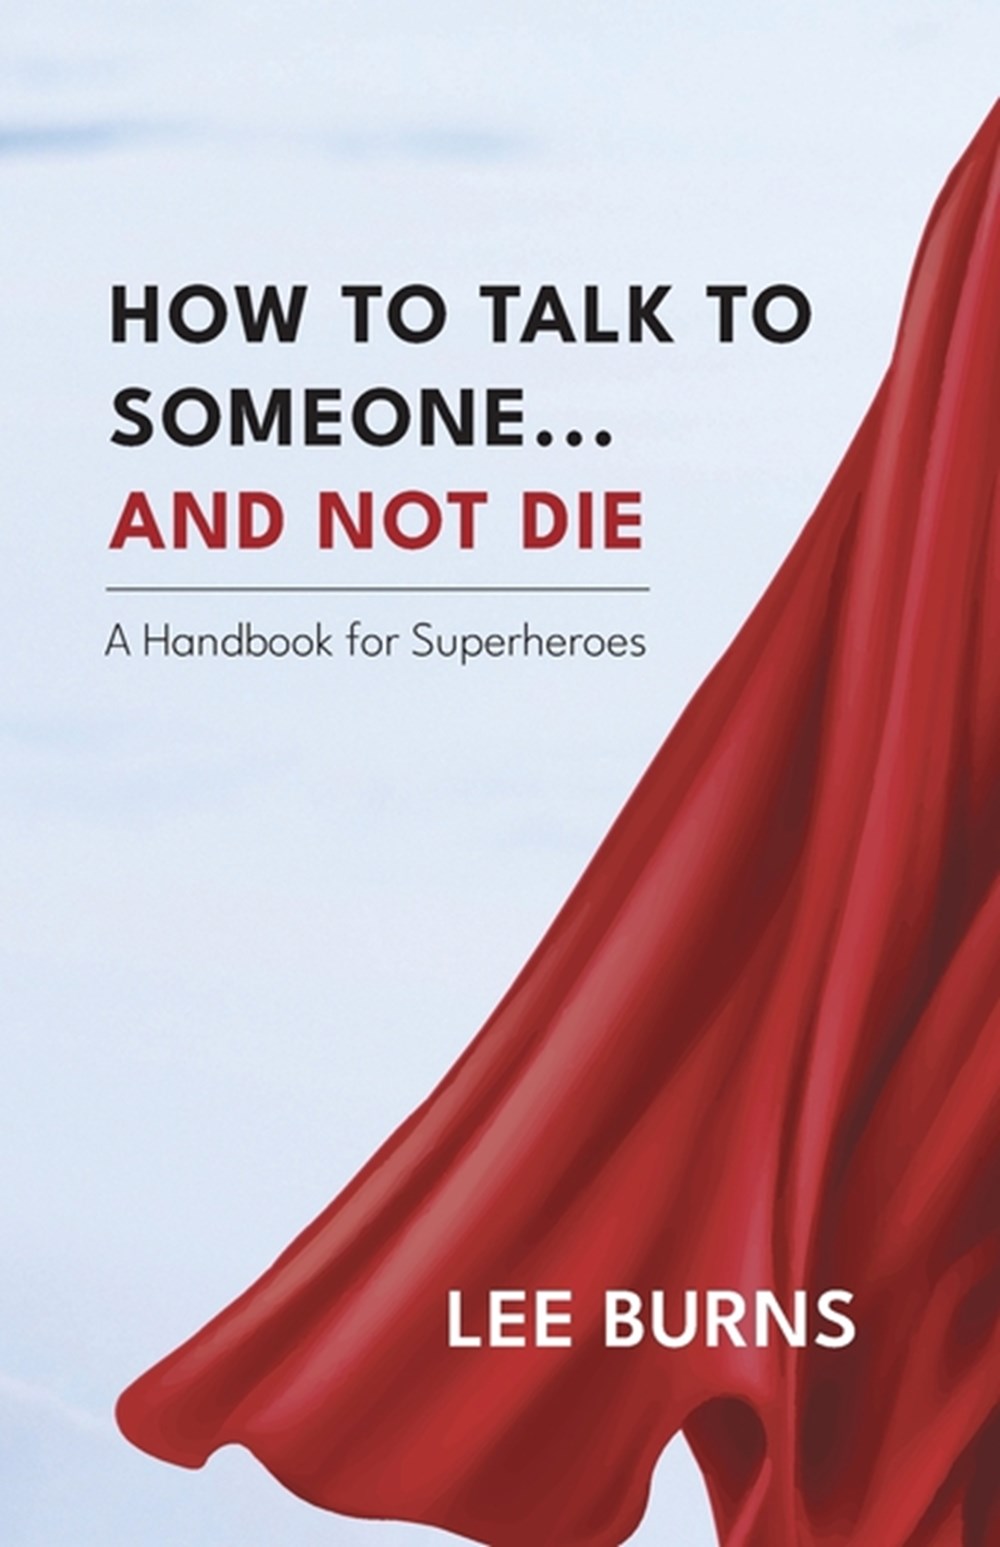 How To Talk To Someone And Not Die: A Handbook for Superheroes